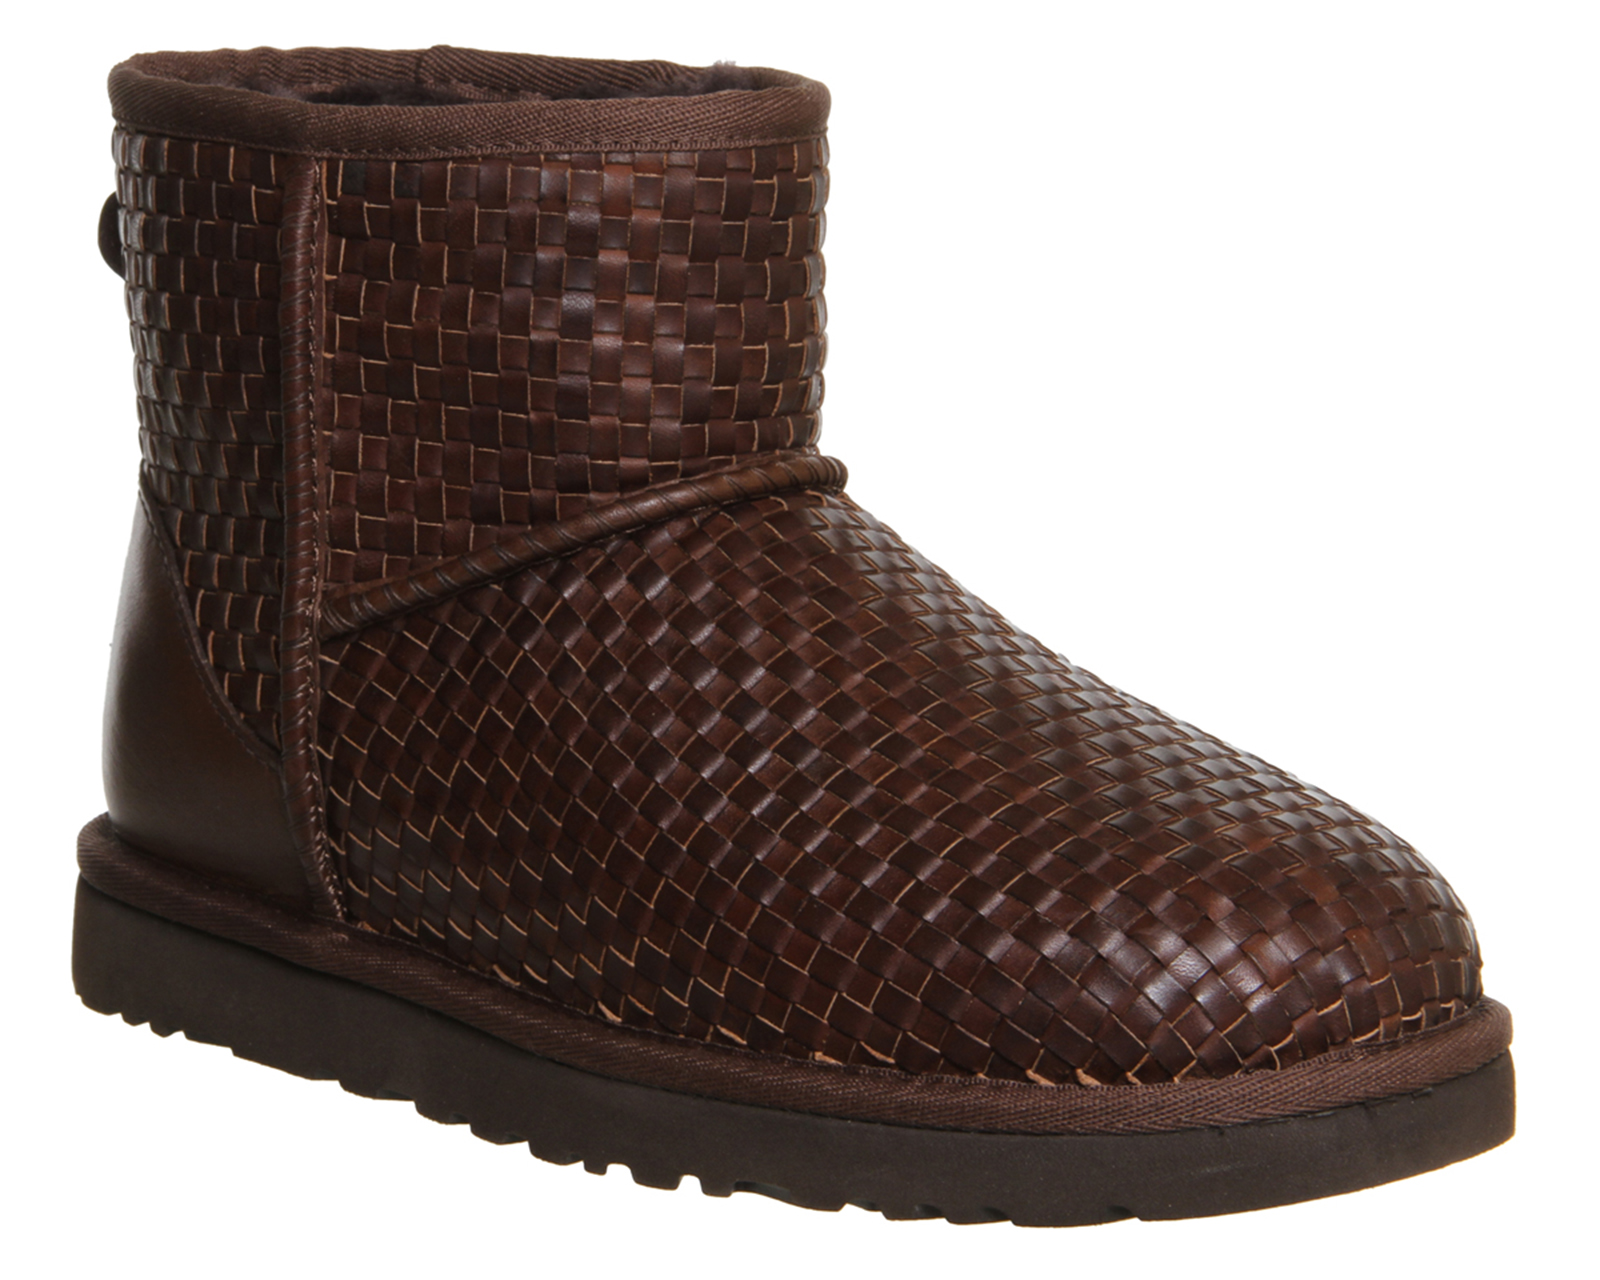 ugg woven boots